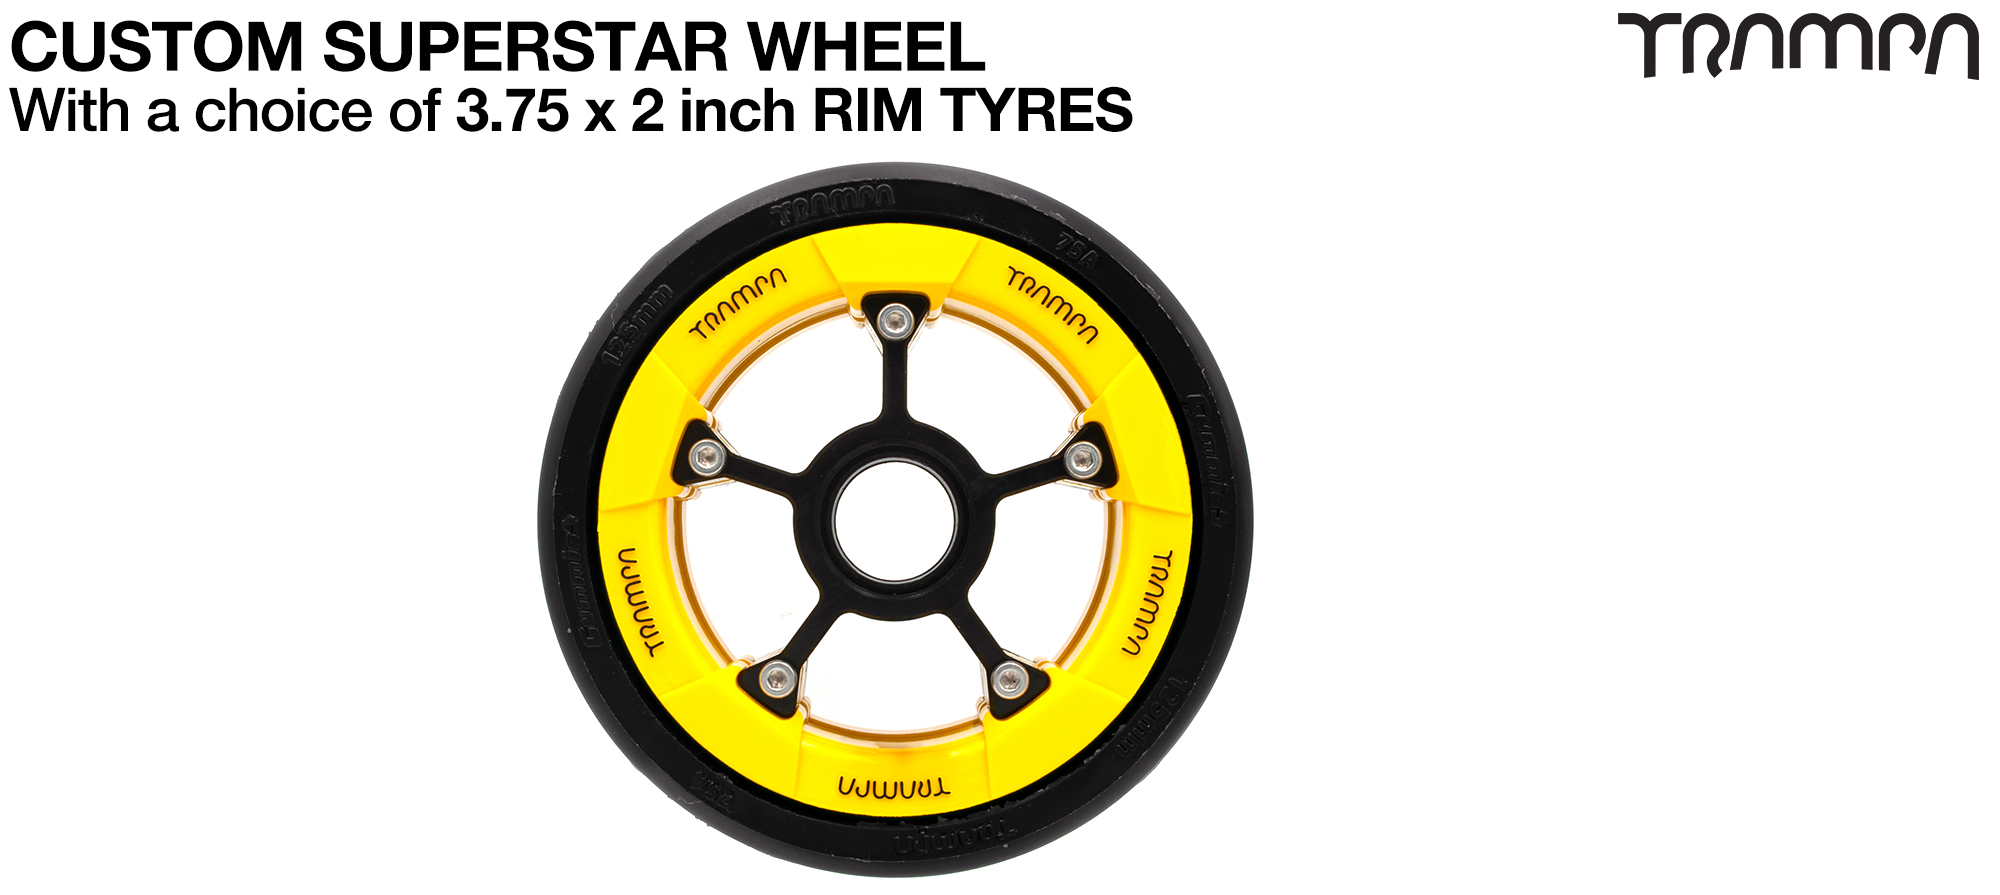 SUPERSTAR WHEELS showing with 5 Inch GUMMY Tyres 3.75 x 2 Inch! Build the SUPERSTAR wheel of your dreams!! Any combination possible up to 8 inch Tyres